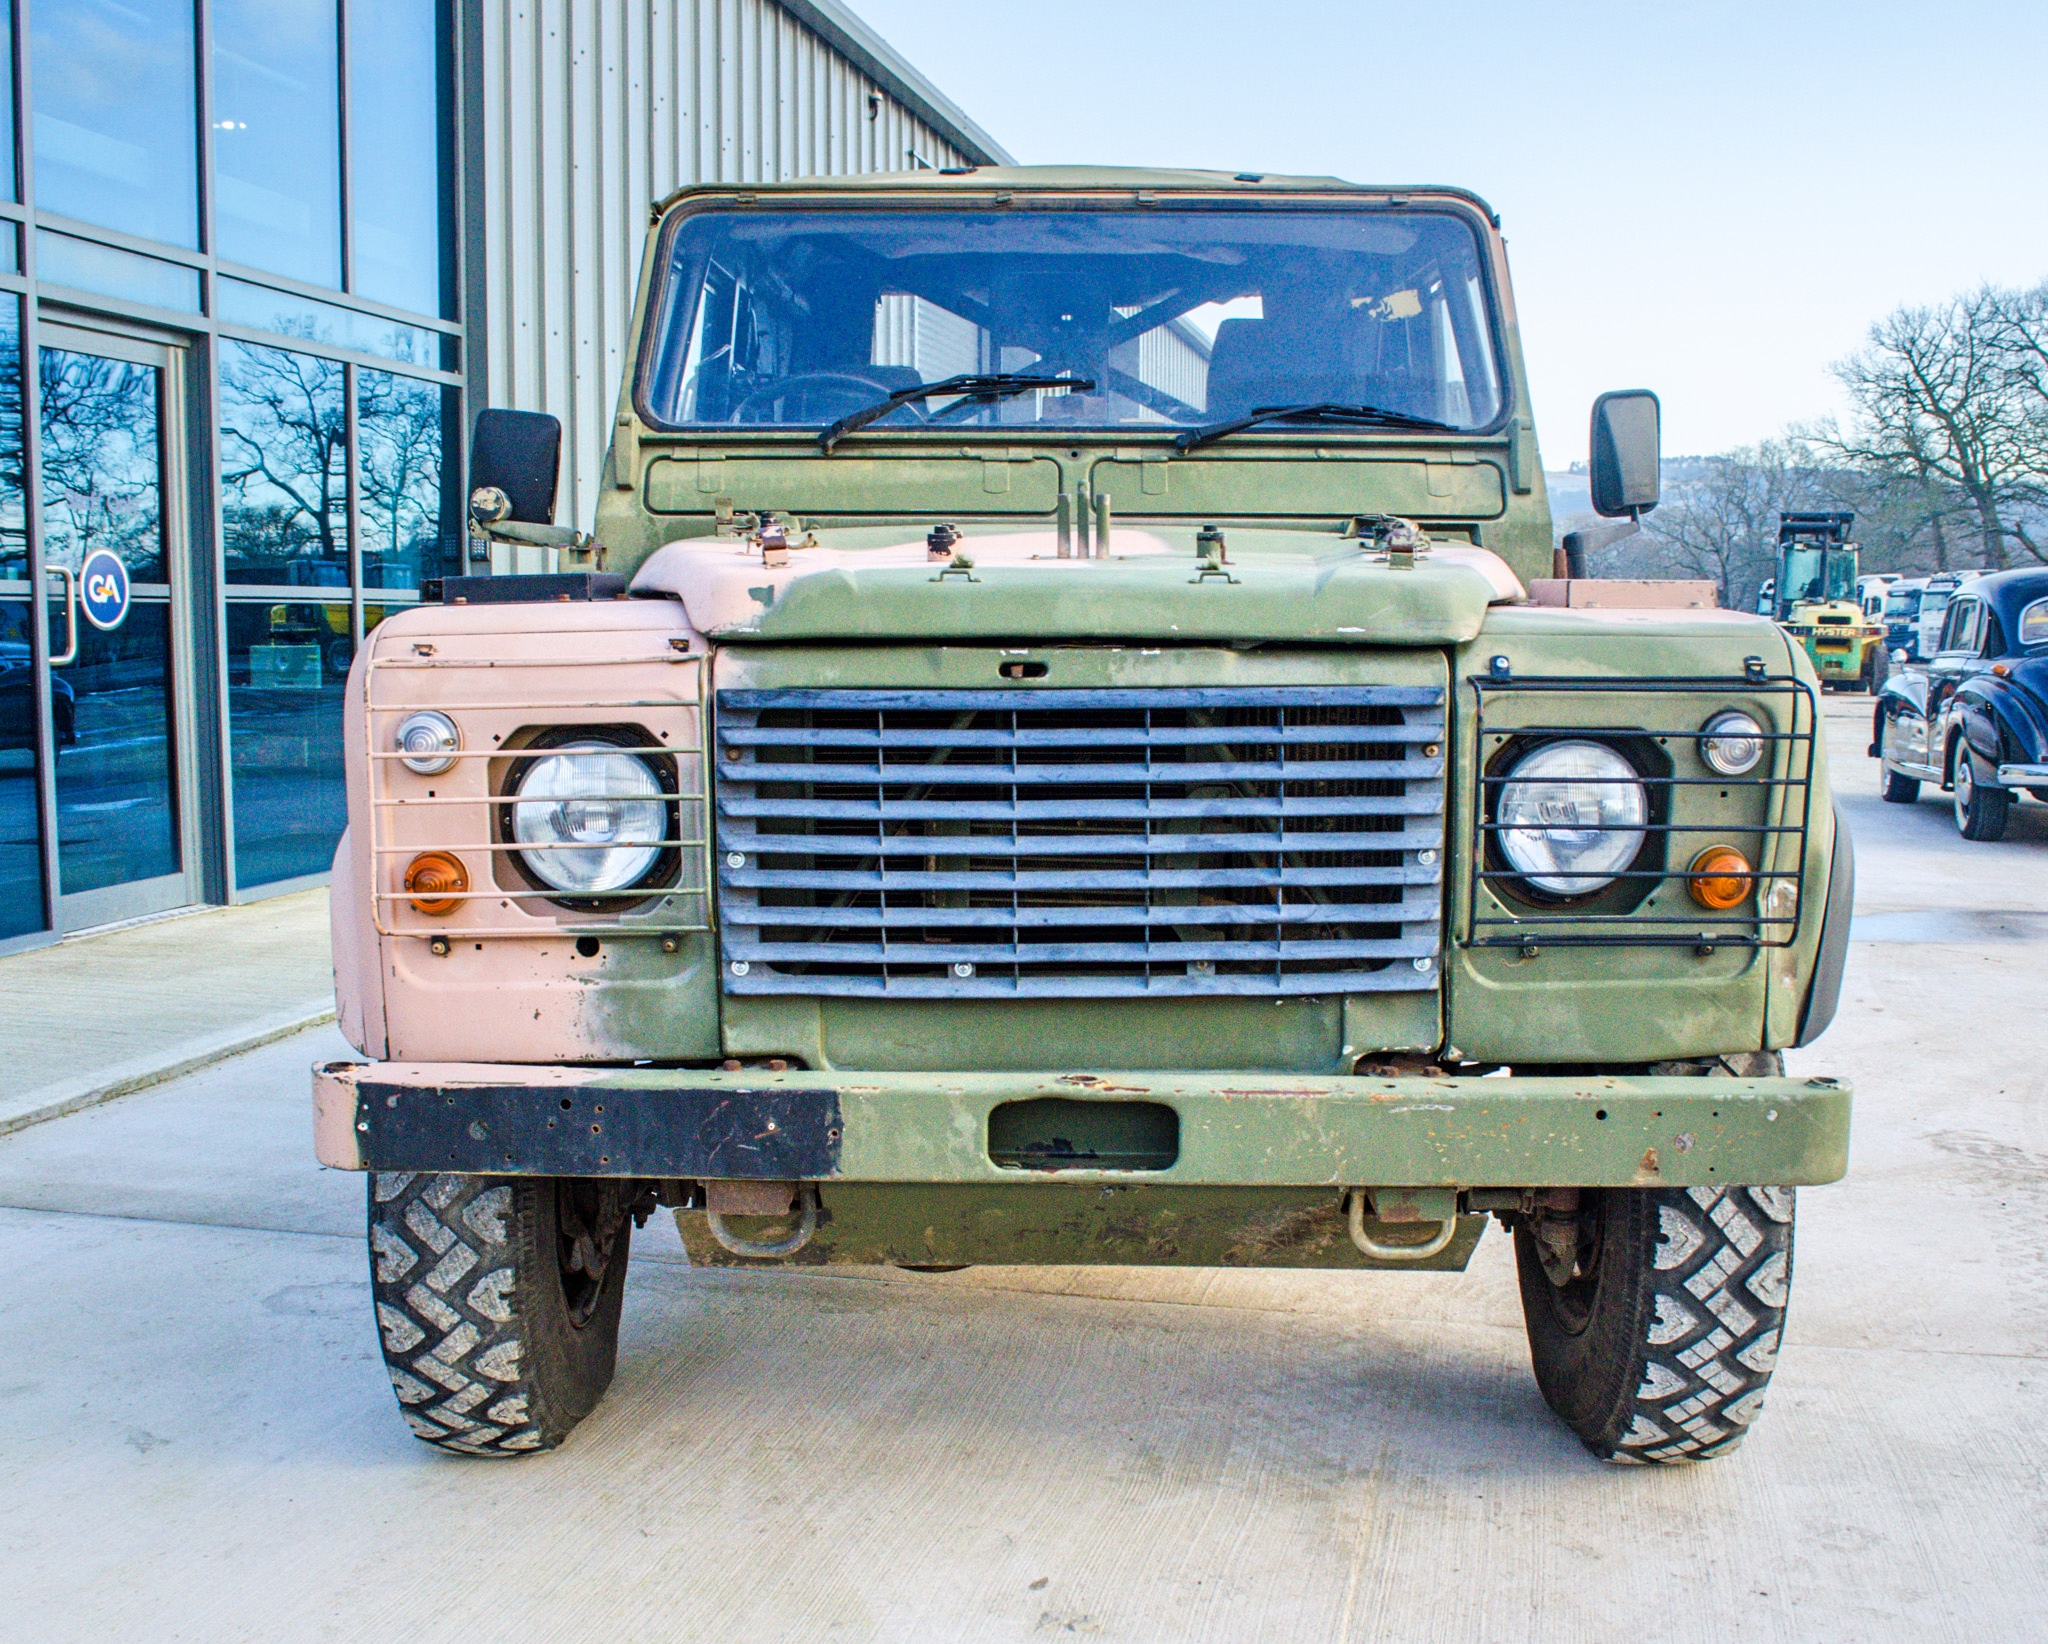 1998 Land Rover Defender 90 WOLF 2,5 litre 300TDI 4 wheel drive utility vehicle Ex MOD - Image 9 of 44